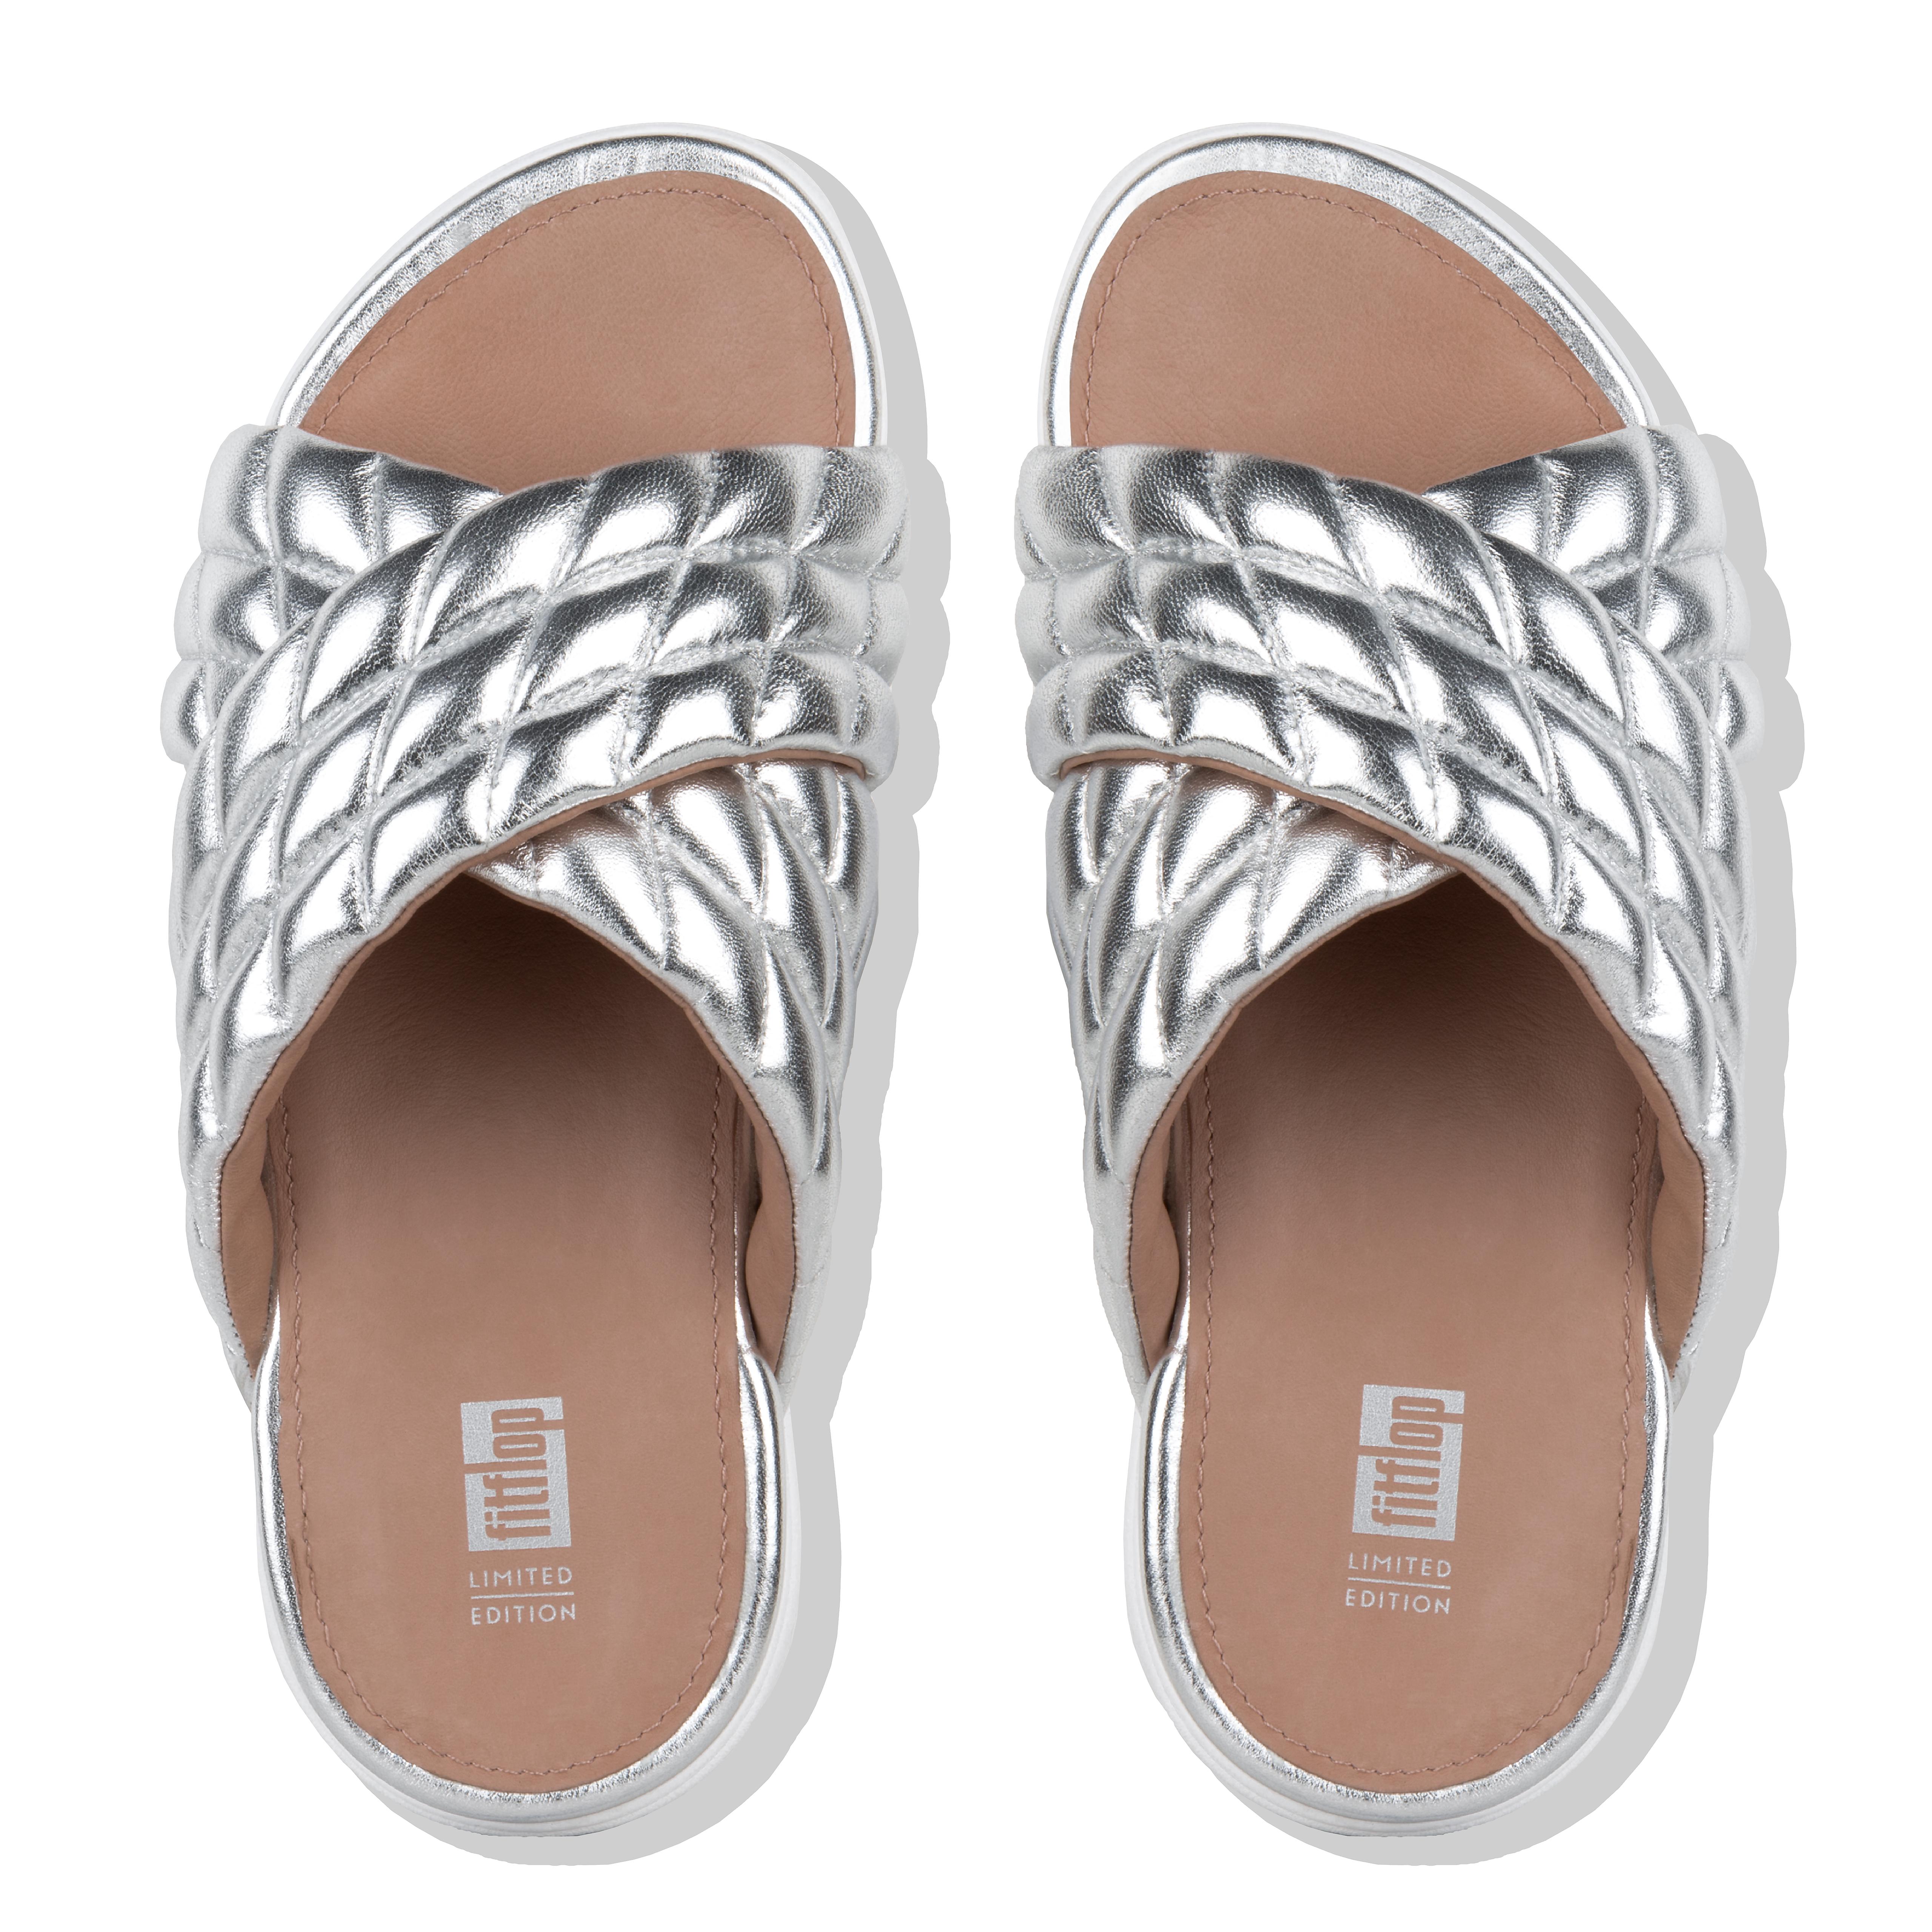 loosh luxe fitflop